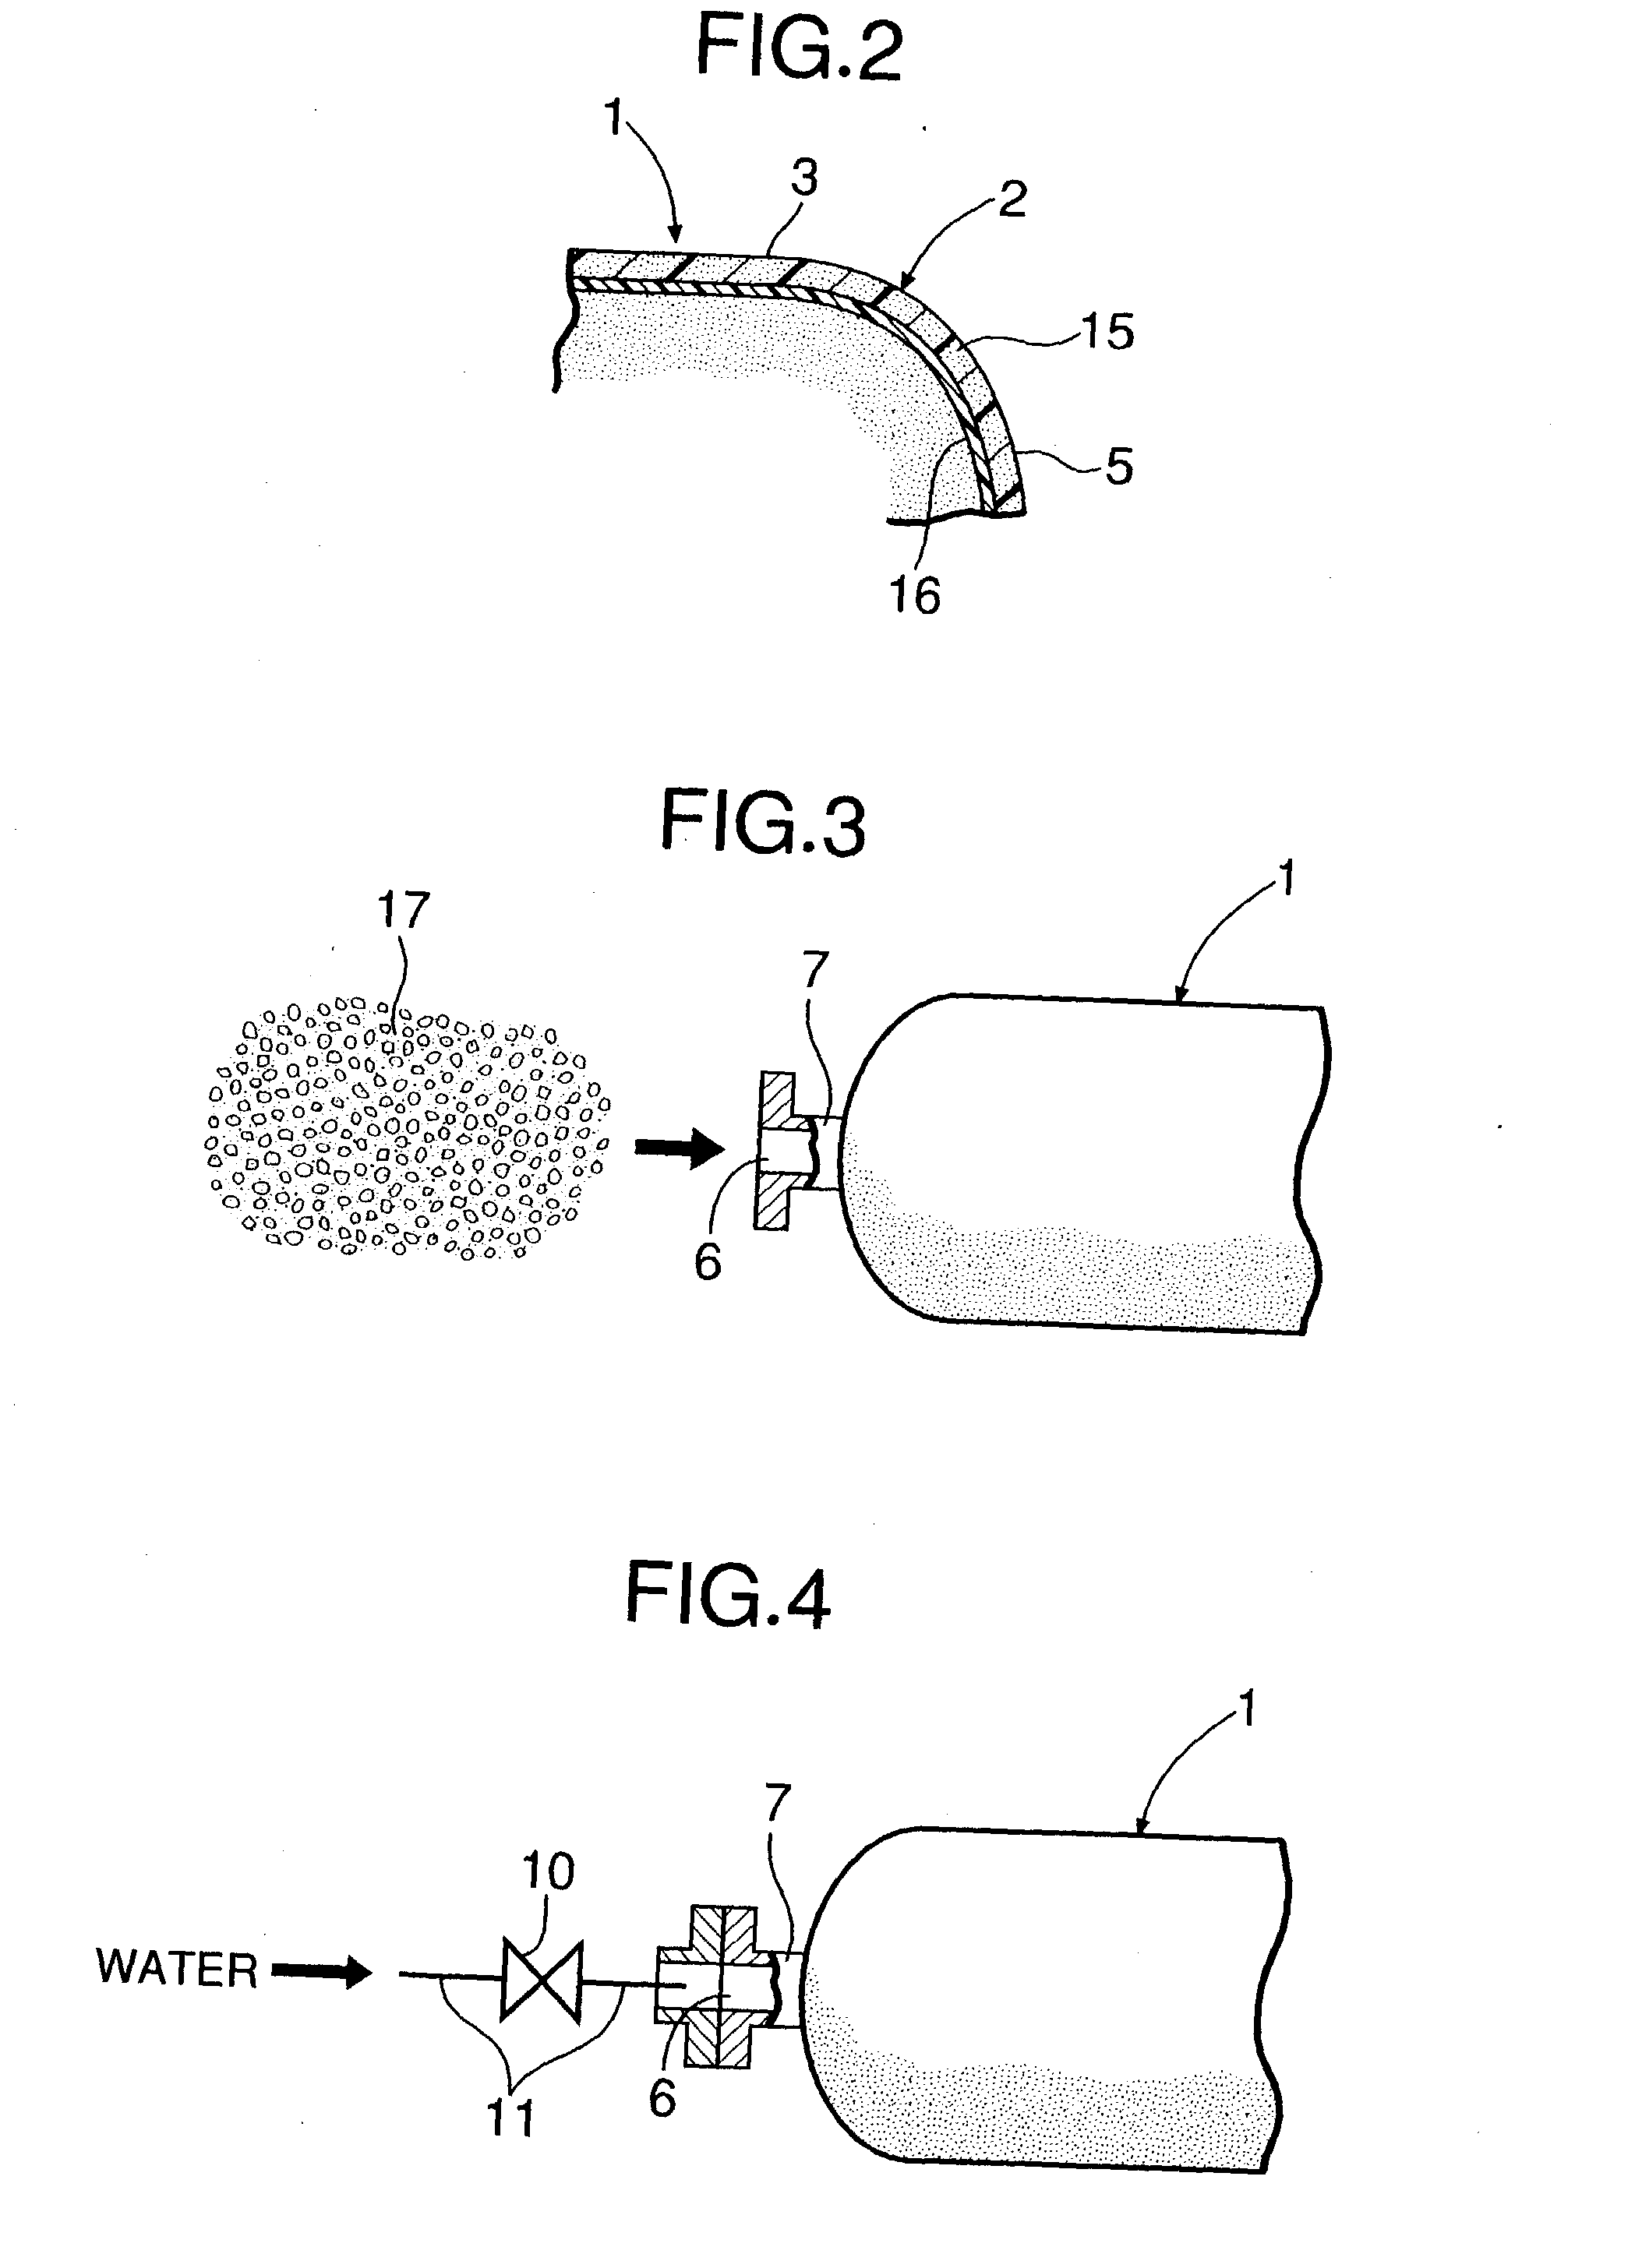 Process for producing high-pressure hydrogen and system for producing high-pressure hydrogen